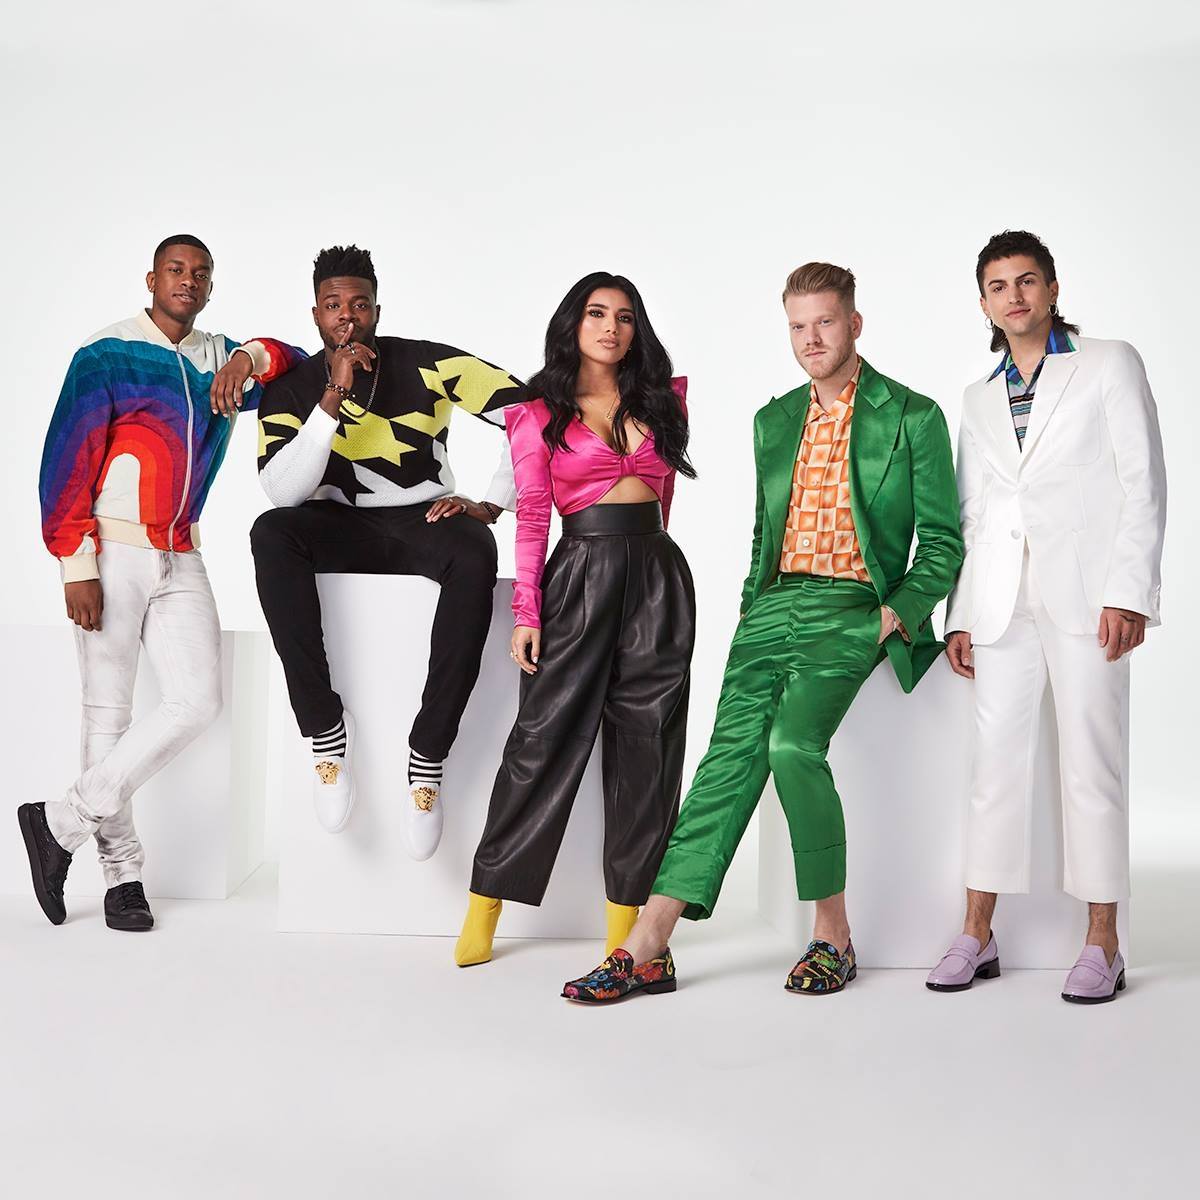 Pentatonix - The World Tour at AFAS Live Tickets